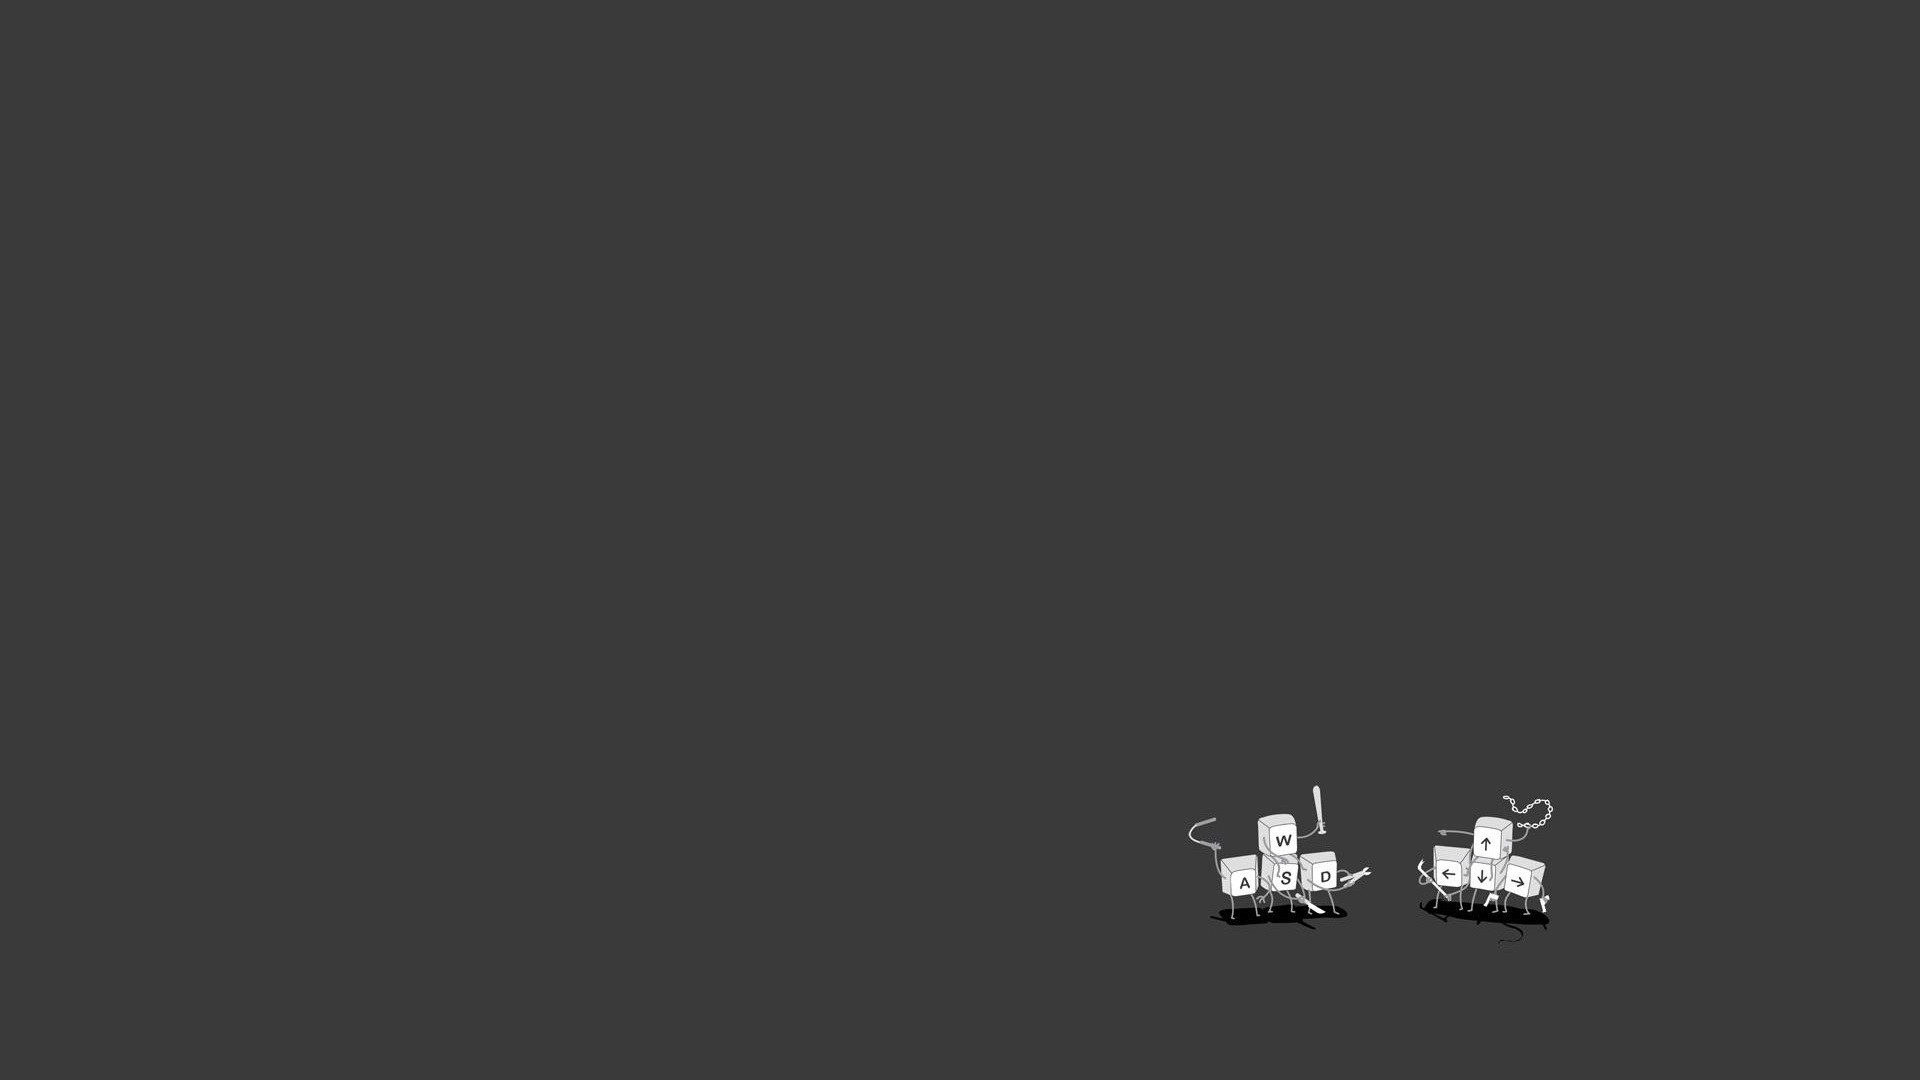 General 1920x1080 drawing humor simple background minimalism gray background dark gray gray keyboards riots computer artwork